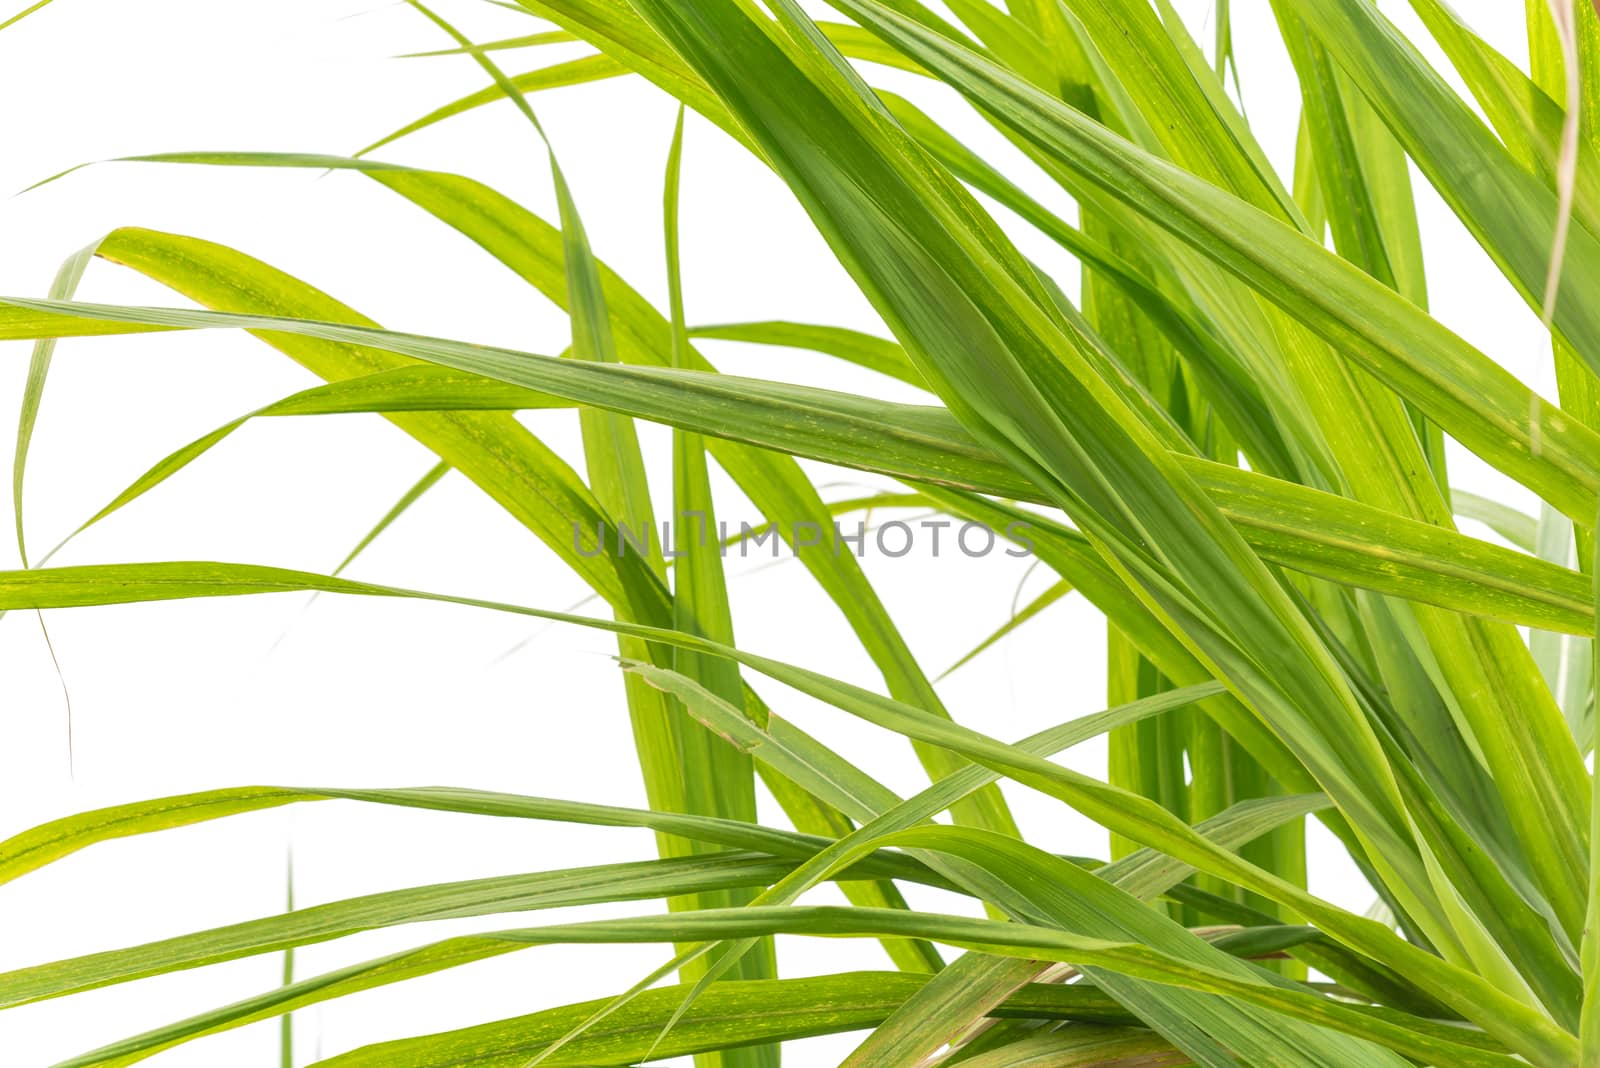 Green lush of sugarcane leaves isolated on white background. Long green leaves with clipping path and copy space